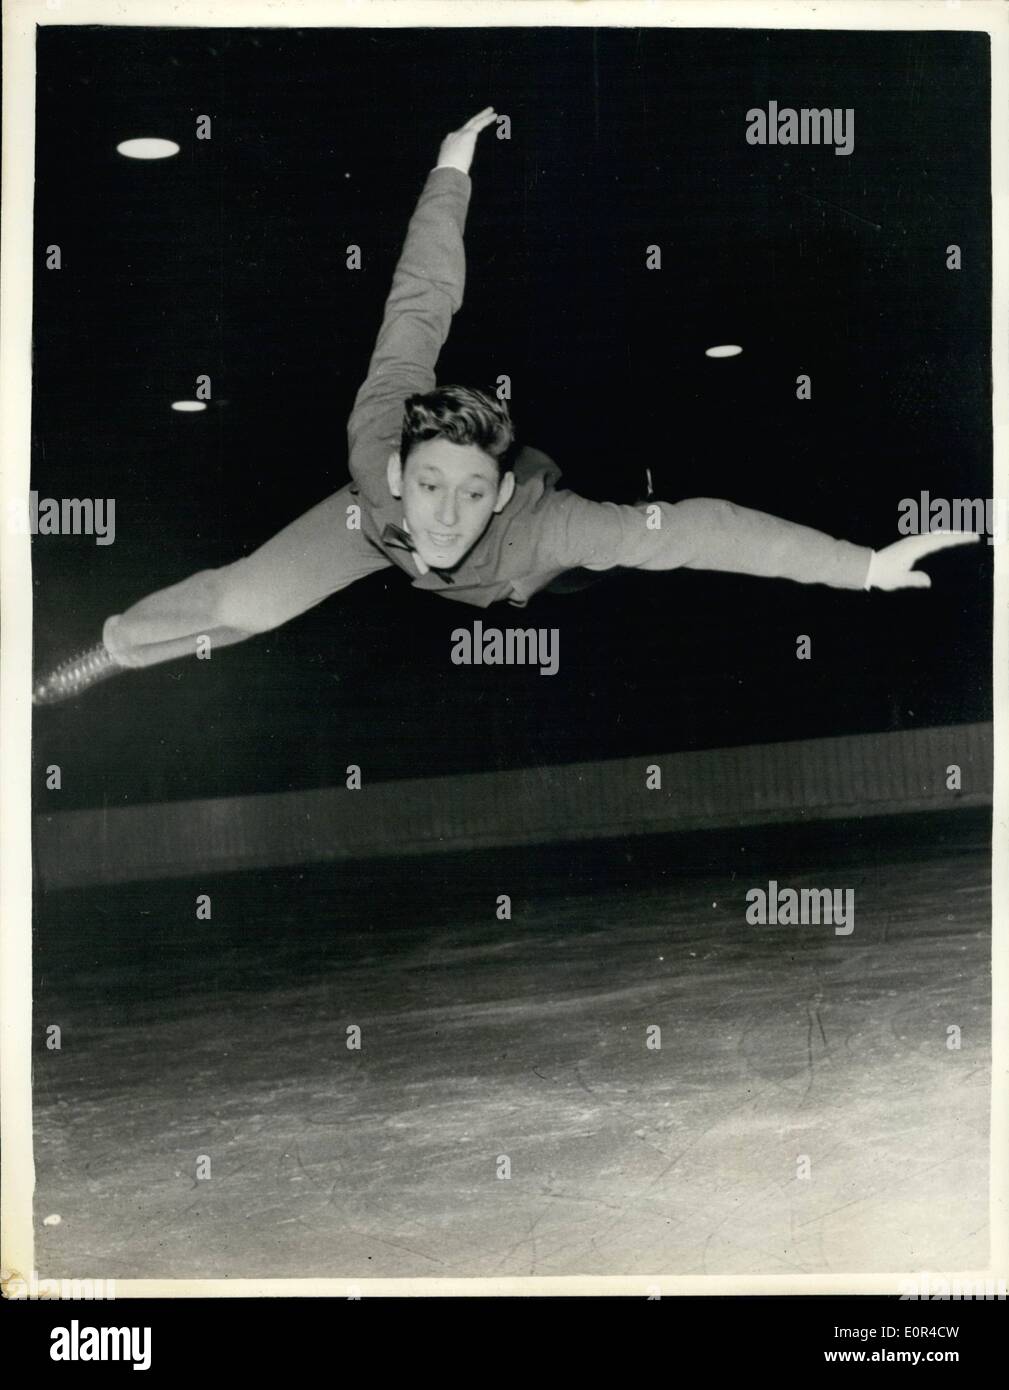 Feb. 02, 1958 - European Ice Skating Championships. A fine action shot of A. Calmat, of France who was placed third in the Men's Figure Skating - at the European Ice Skating Championships in Bratislava. Stock Photo